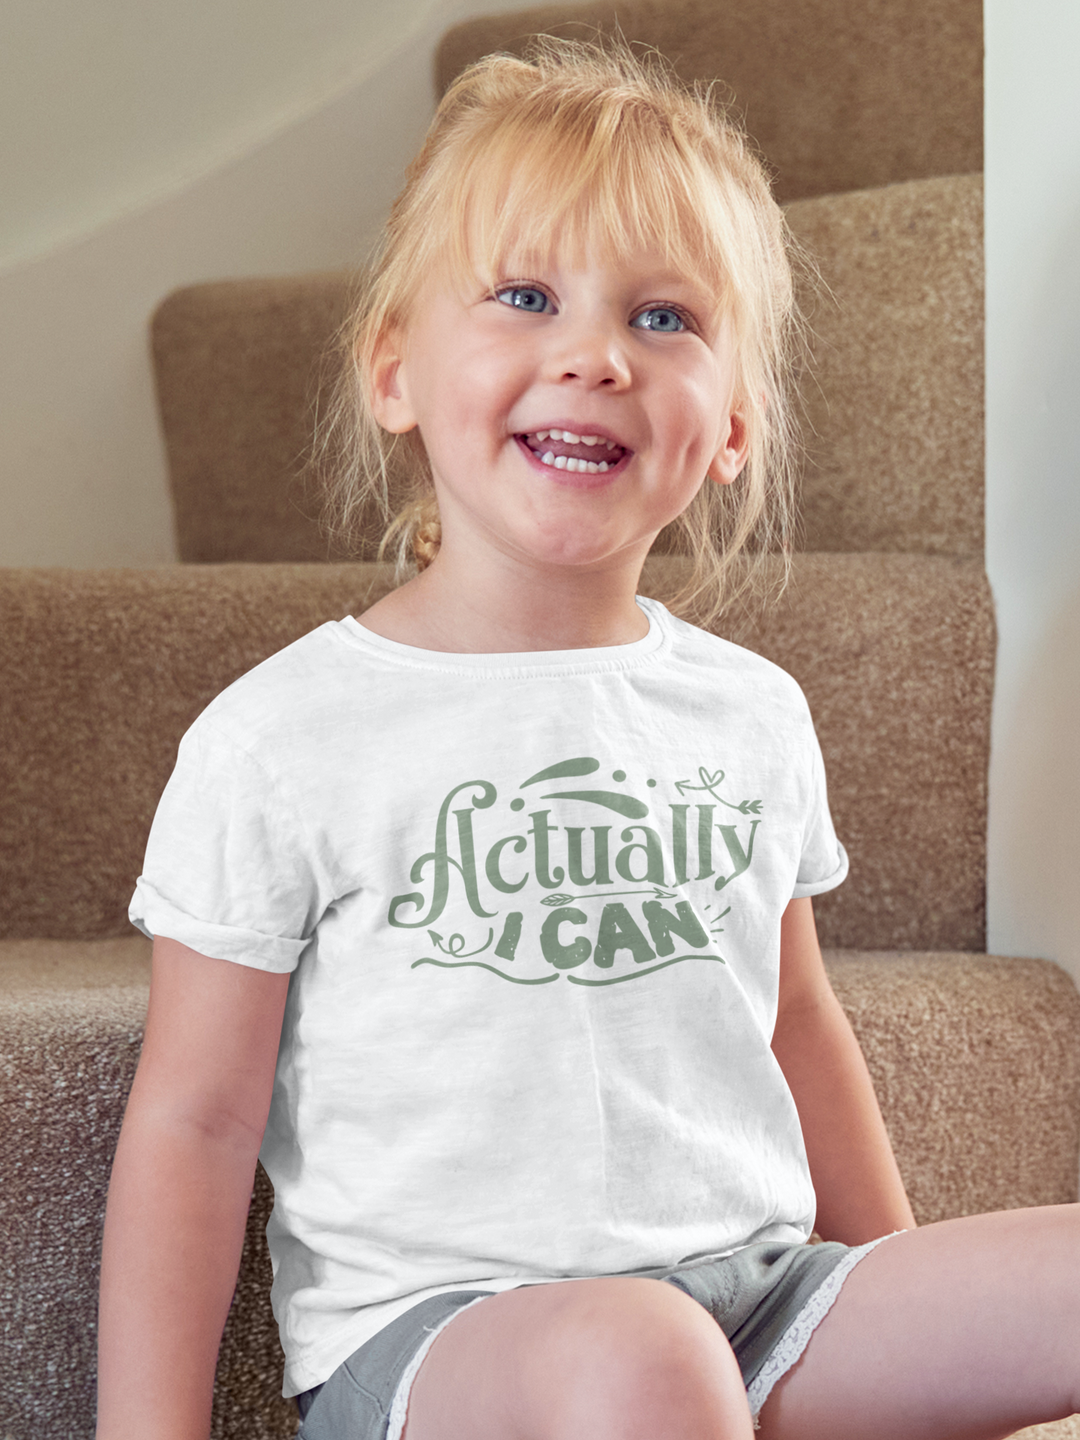 Actually I Can Loden Frost. Short Sleeve T Shirt For Toddler And Kids. - TeesForToddlersandKids -  t-shirt - positive - actually-i-can-loden-frost-short-sleeve-t-shirt-for-toddler-and-kids